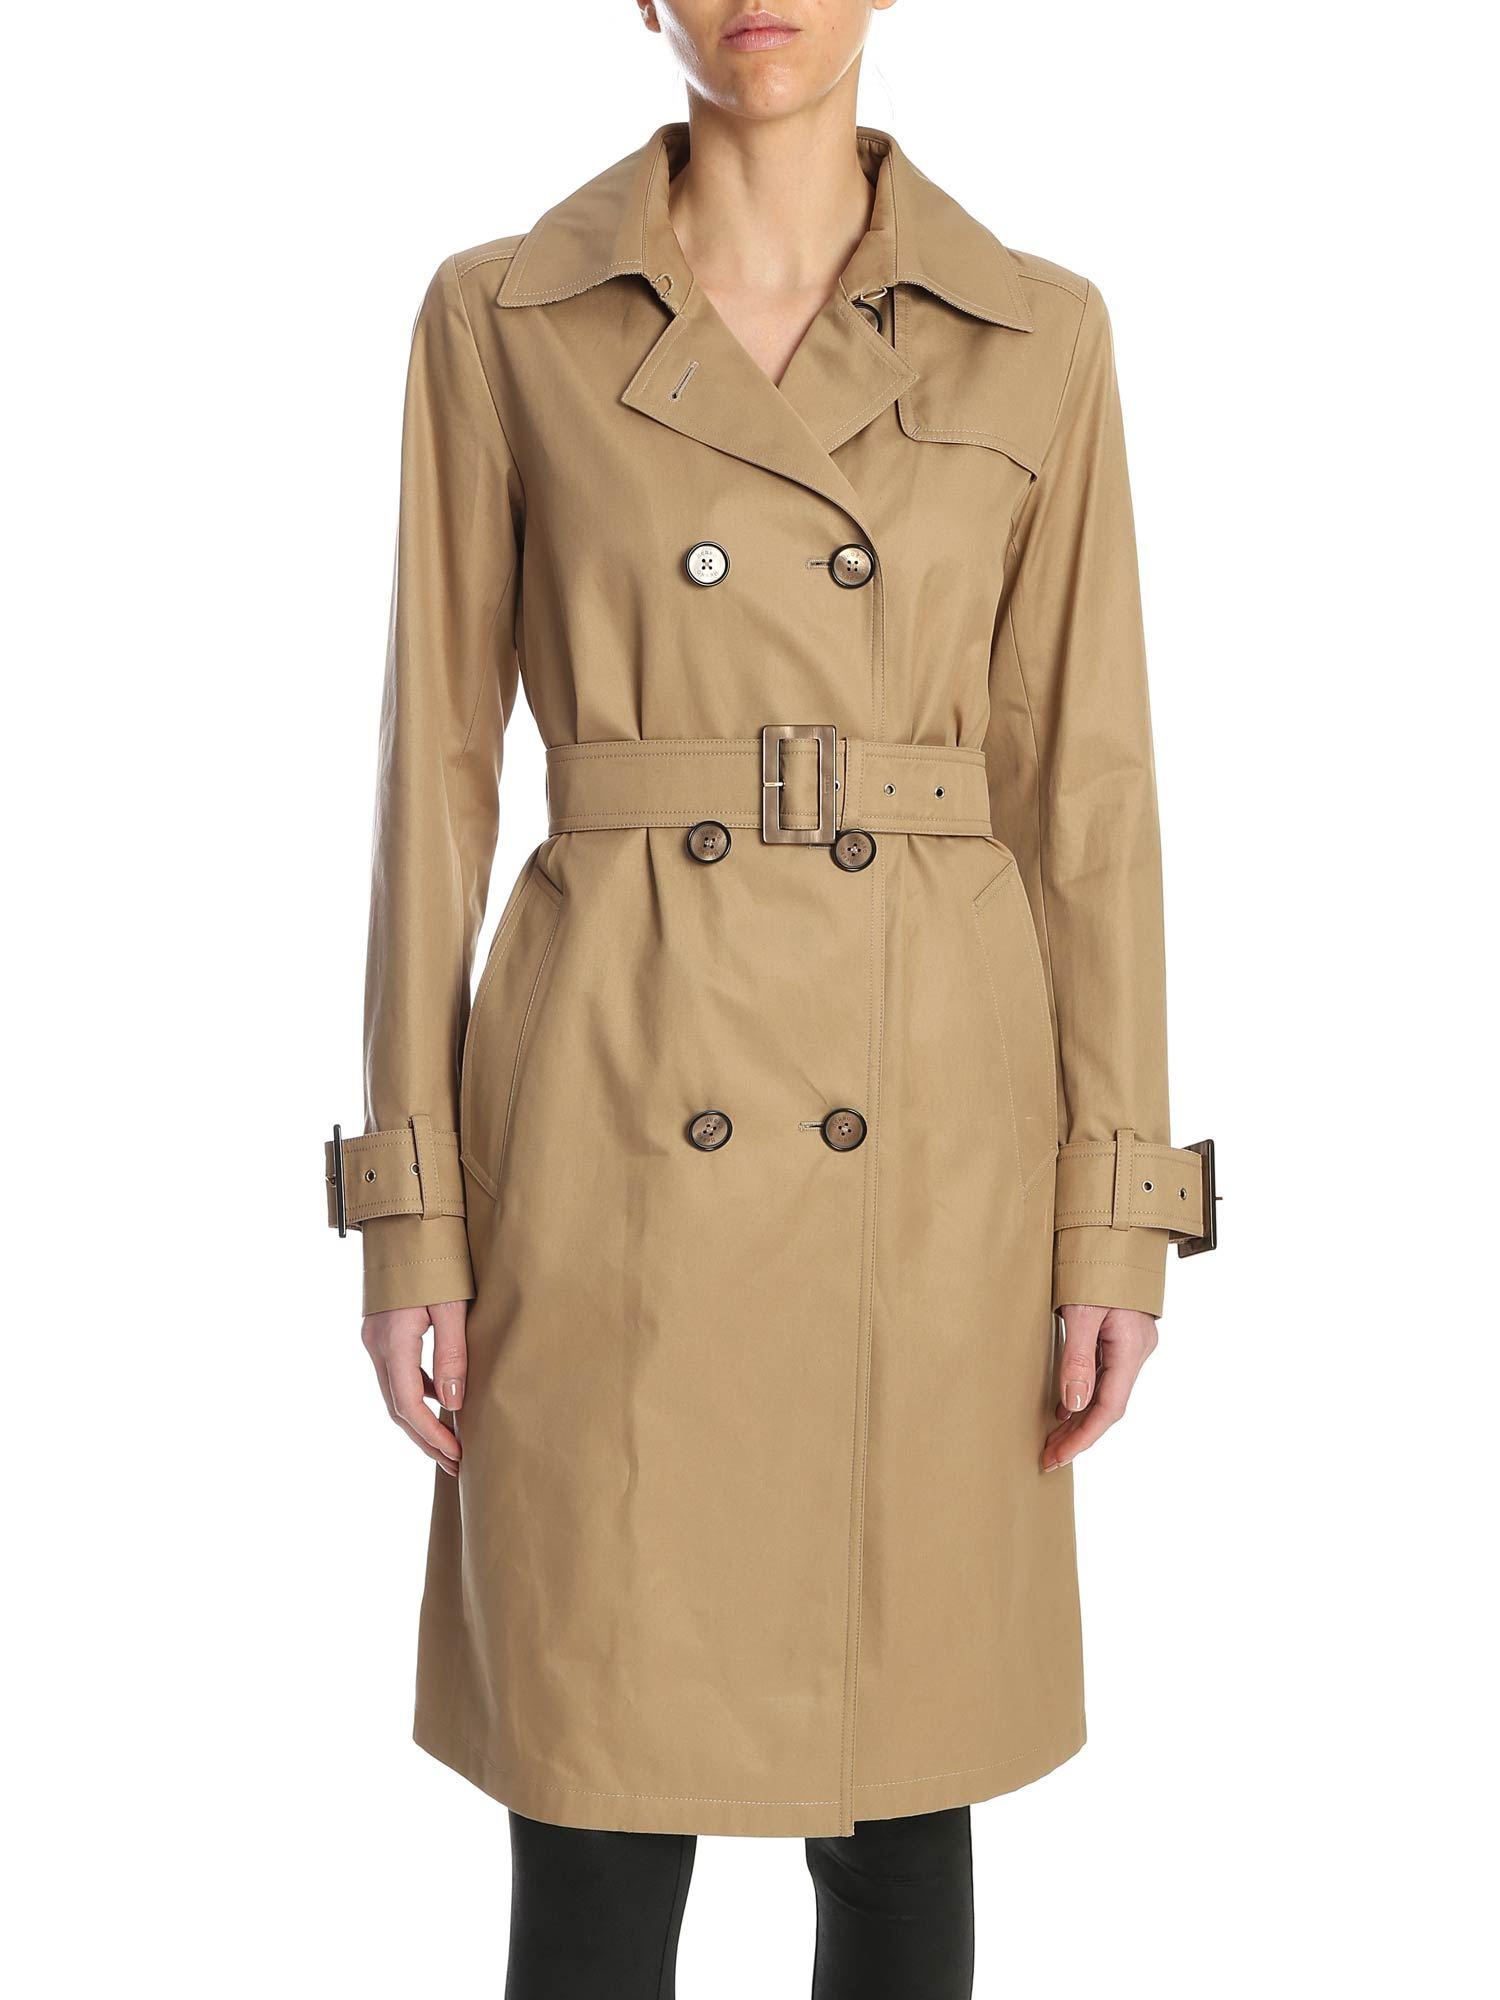 Herno Cotton Rain Collection Trench Coat in Beige (Natural) - Lyst